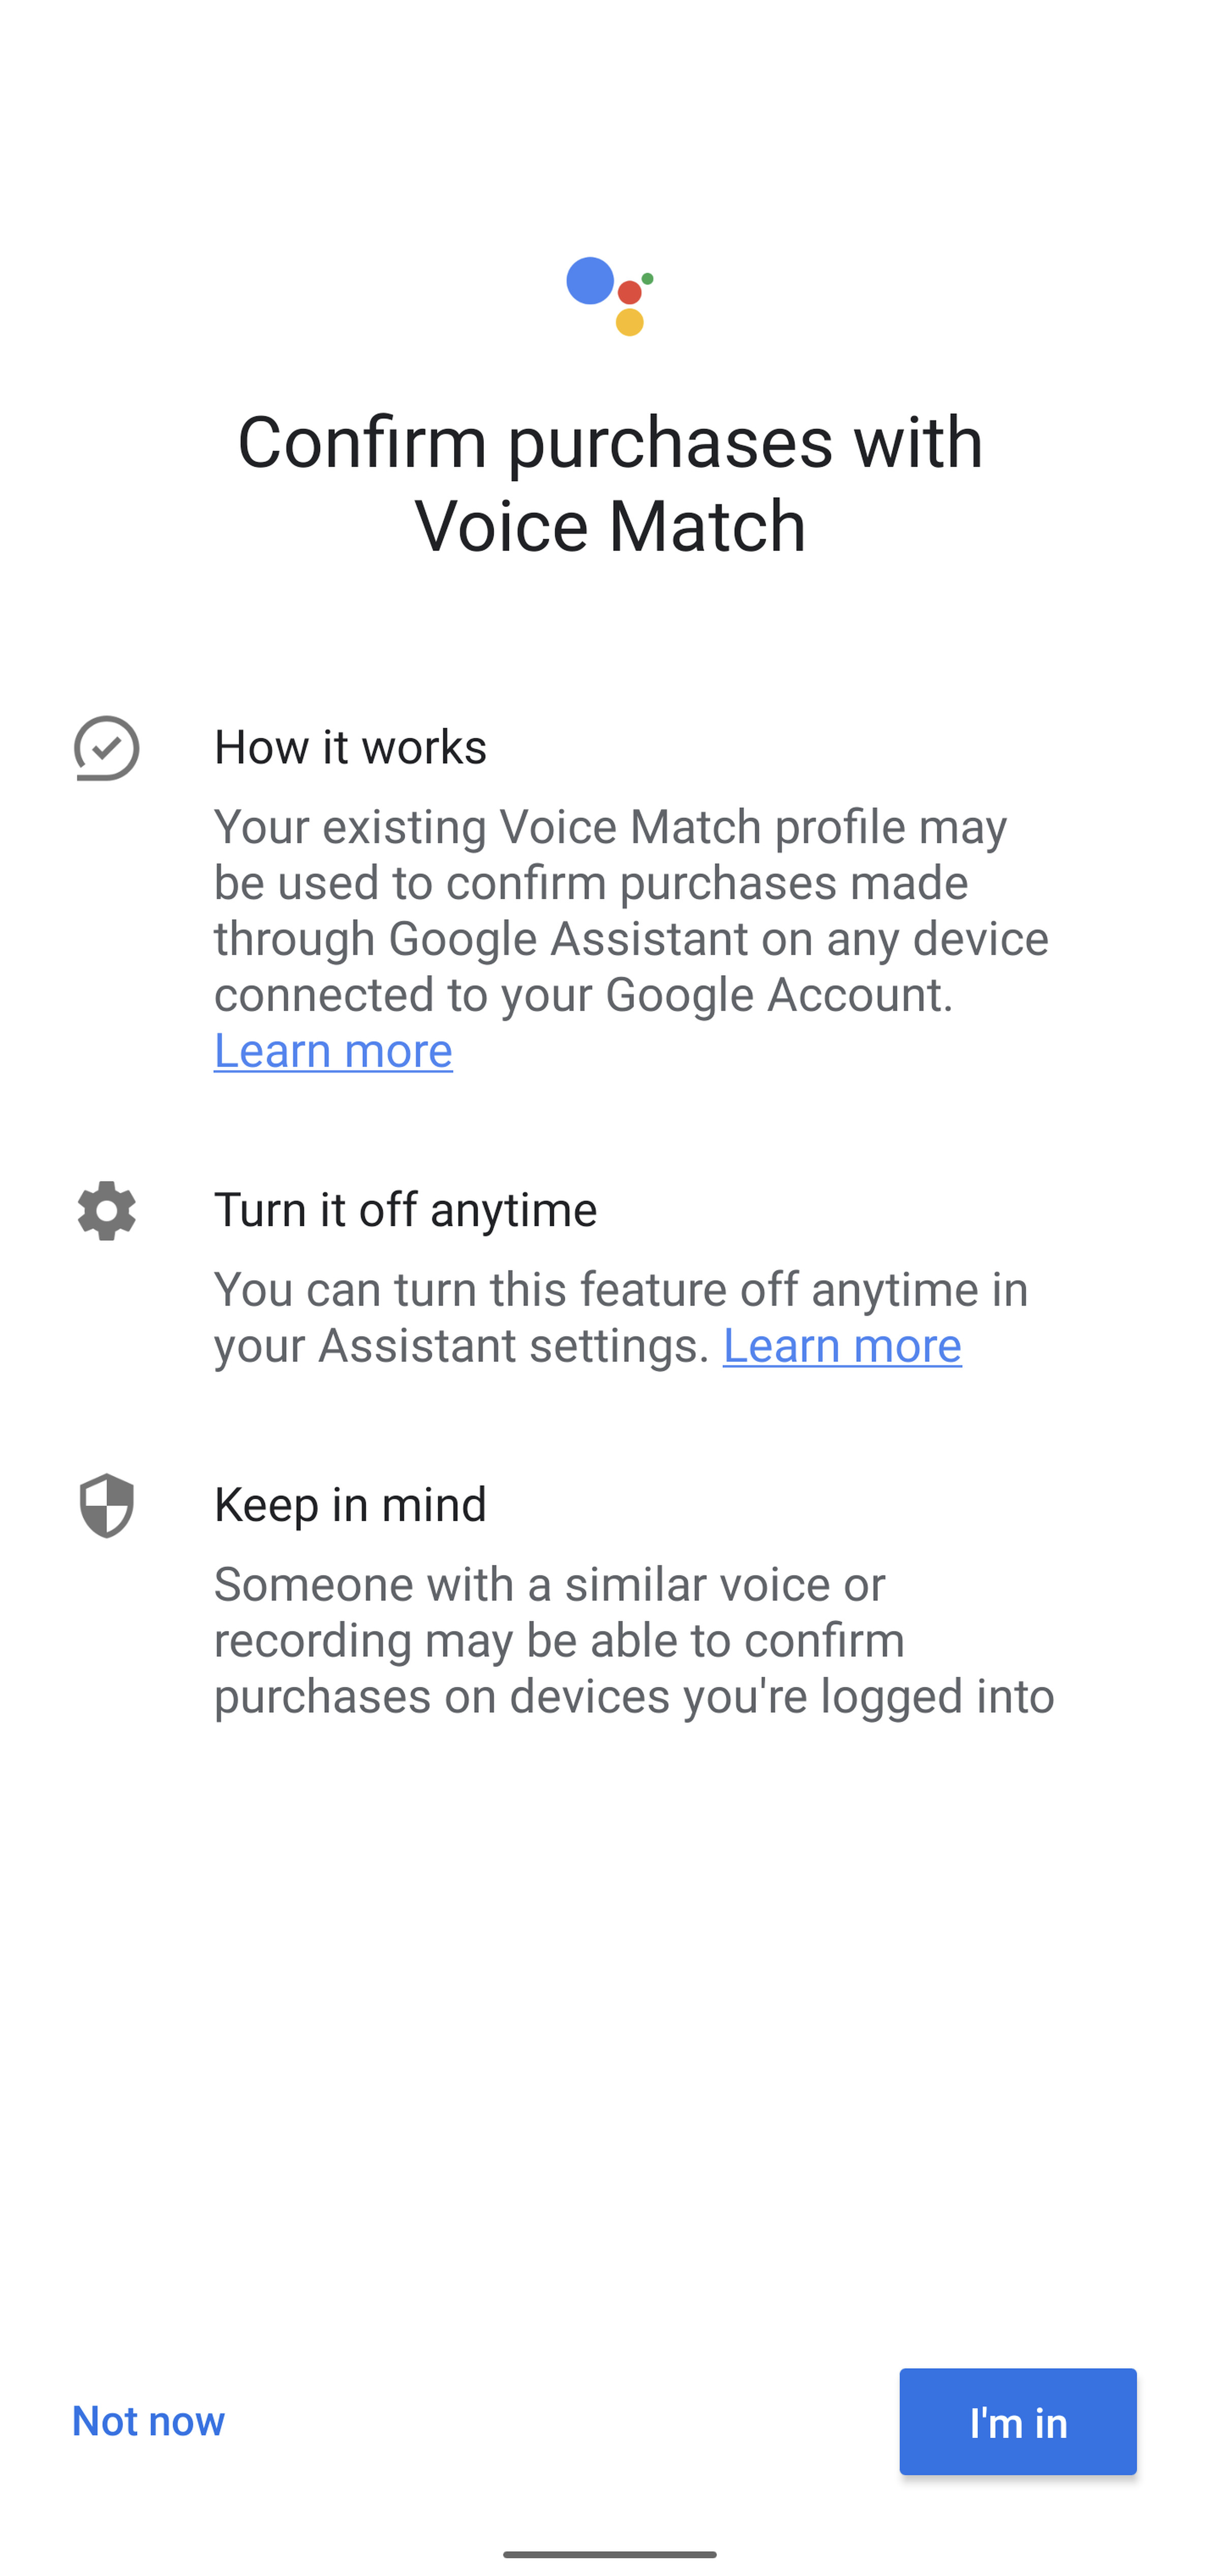 When setting up the feature, Google warns that someone with a similar voice to you could confirm purchases on your device.